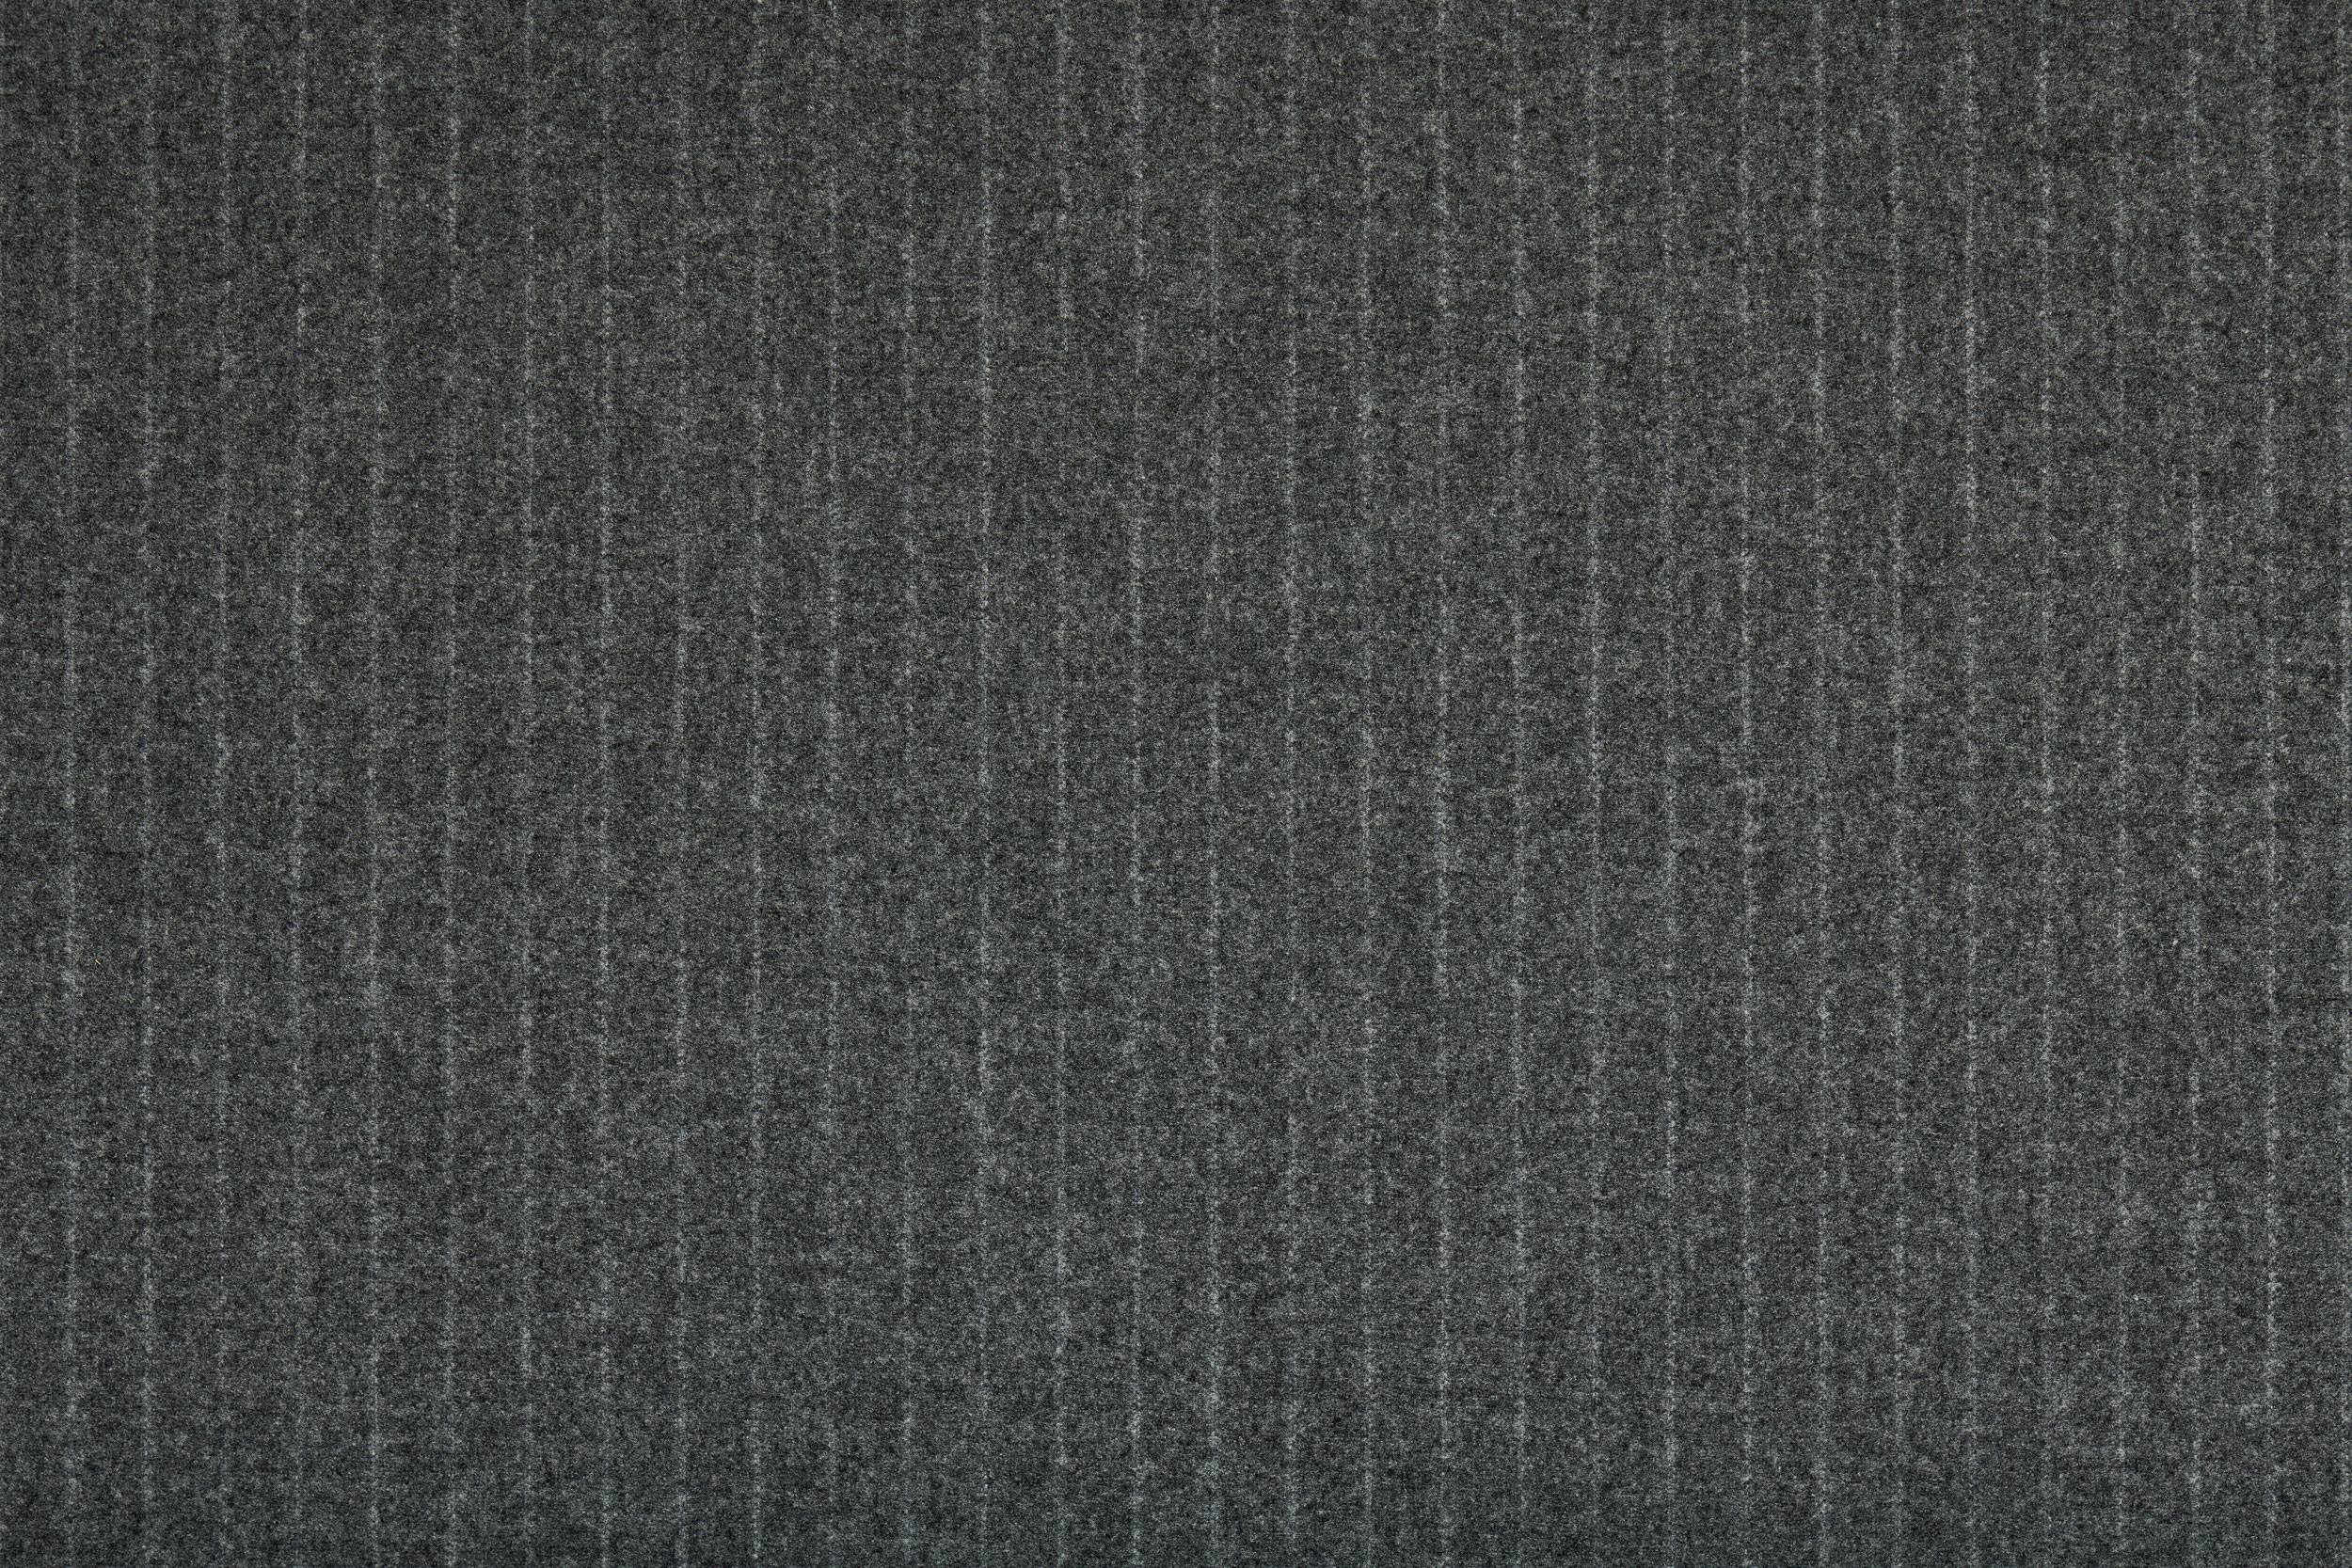 Mid-weight Wool Blend Pinstripe Pin Stripe Heather Grey/Off-White Fabric By  the Yard (3460W